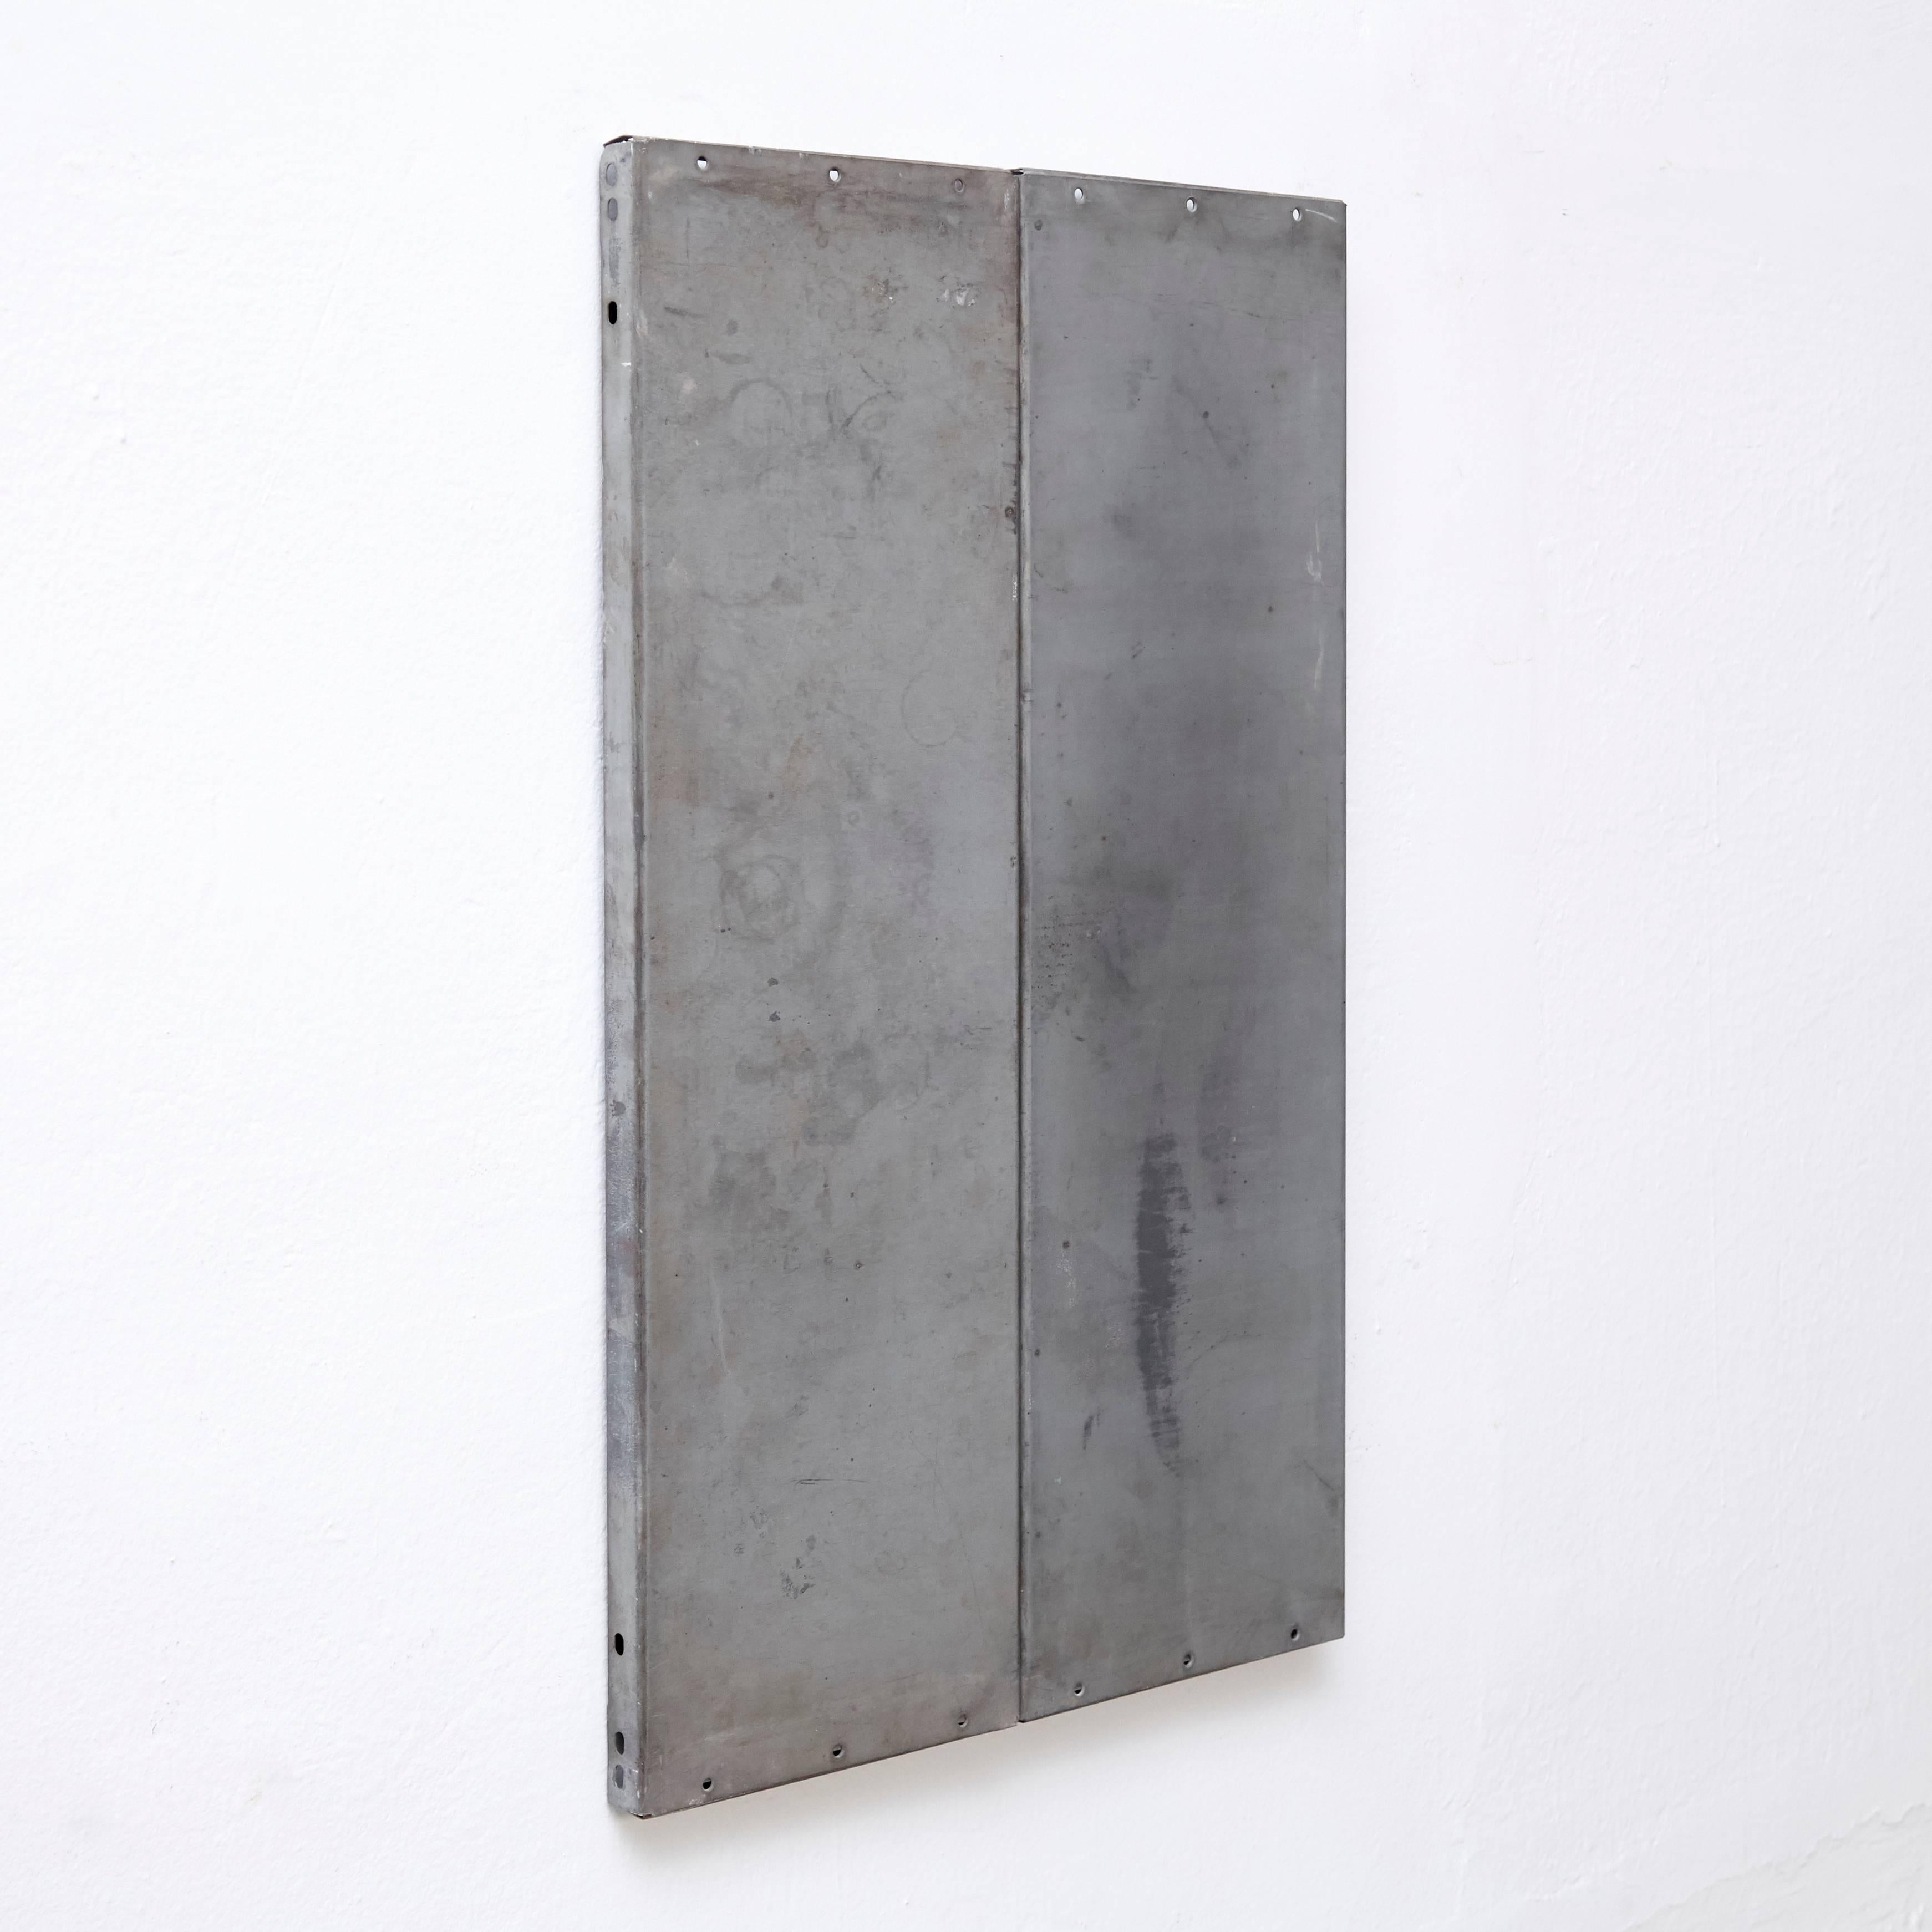 Ramon Horts, minimalism artwork.

Structures of metal compositions made in Barcelona, circa 2016. For a solo exhibition.
Signed by himself in engraving punch.

Stripping metal, rusted and varnished.
In original conditions.

 